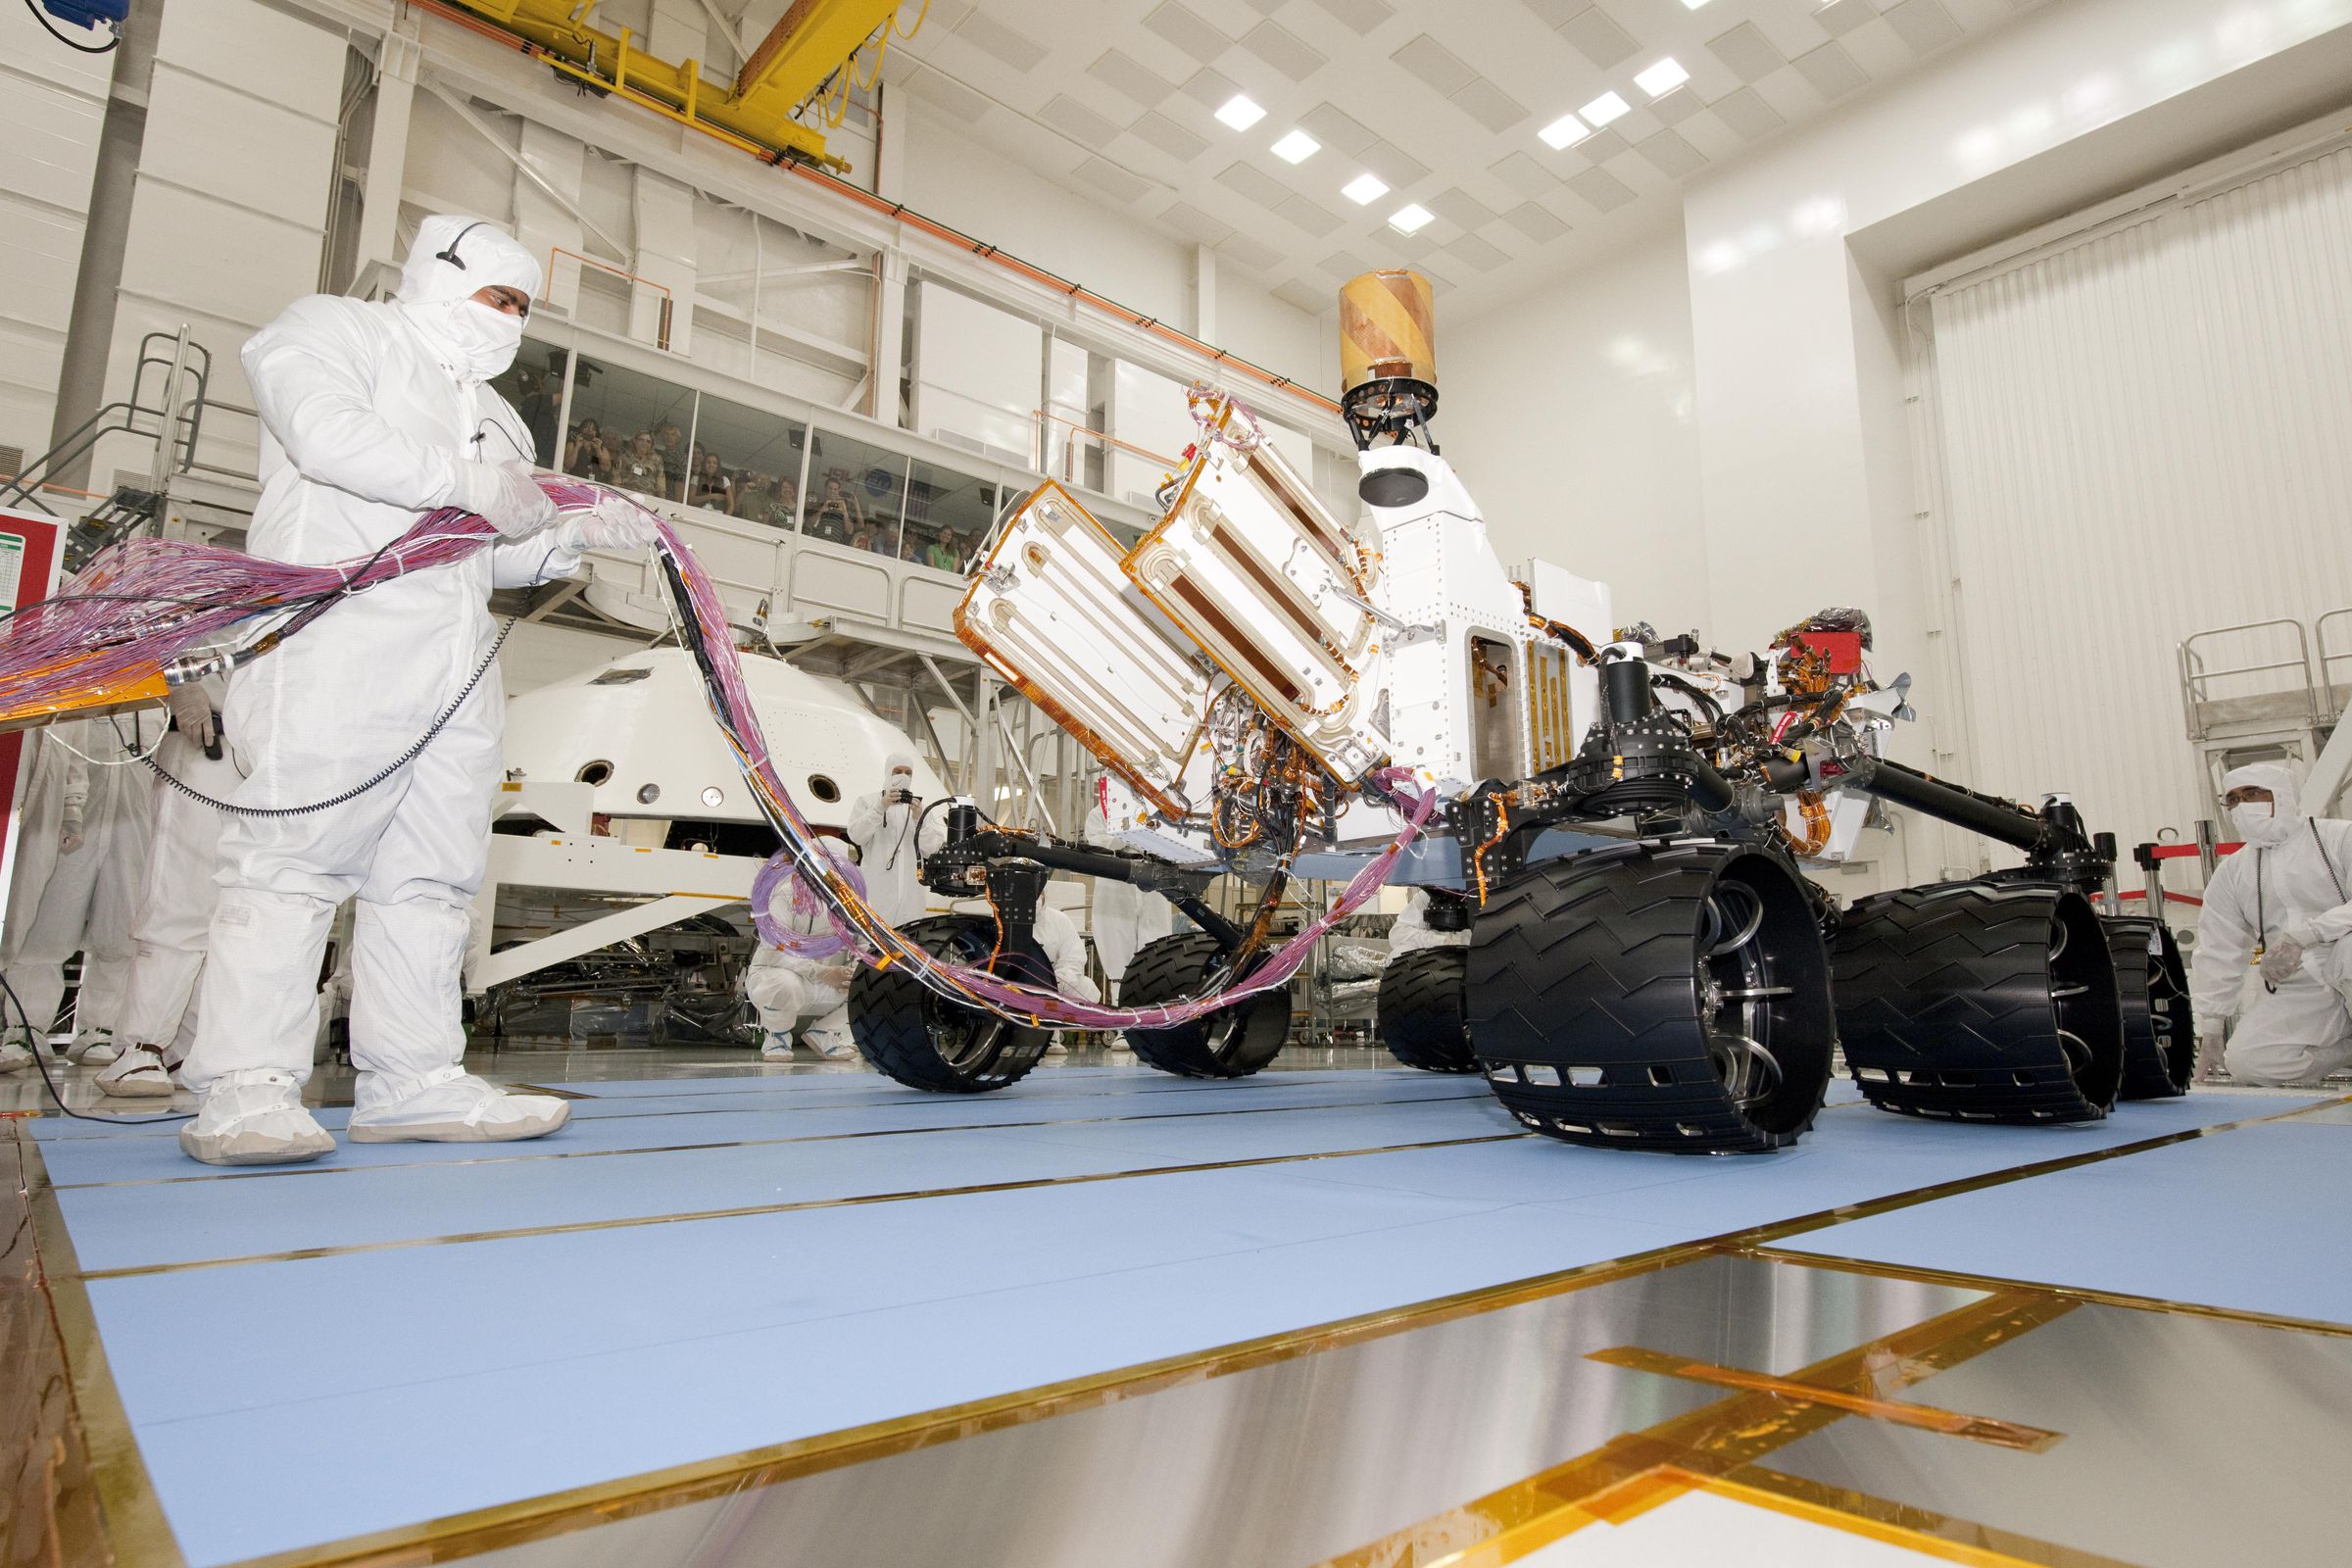 NASA’s Curiosity rover in the clean room before its launch